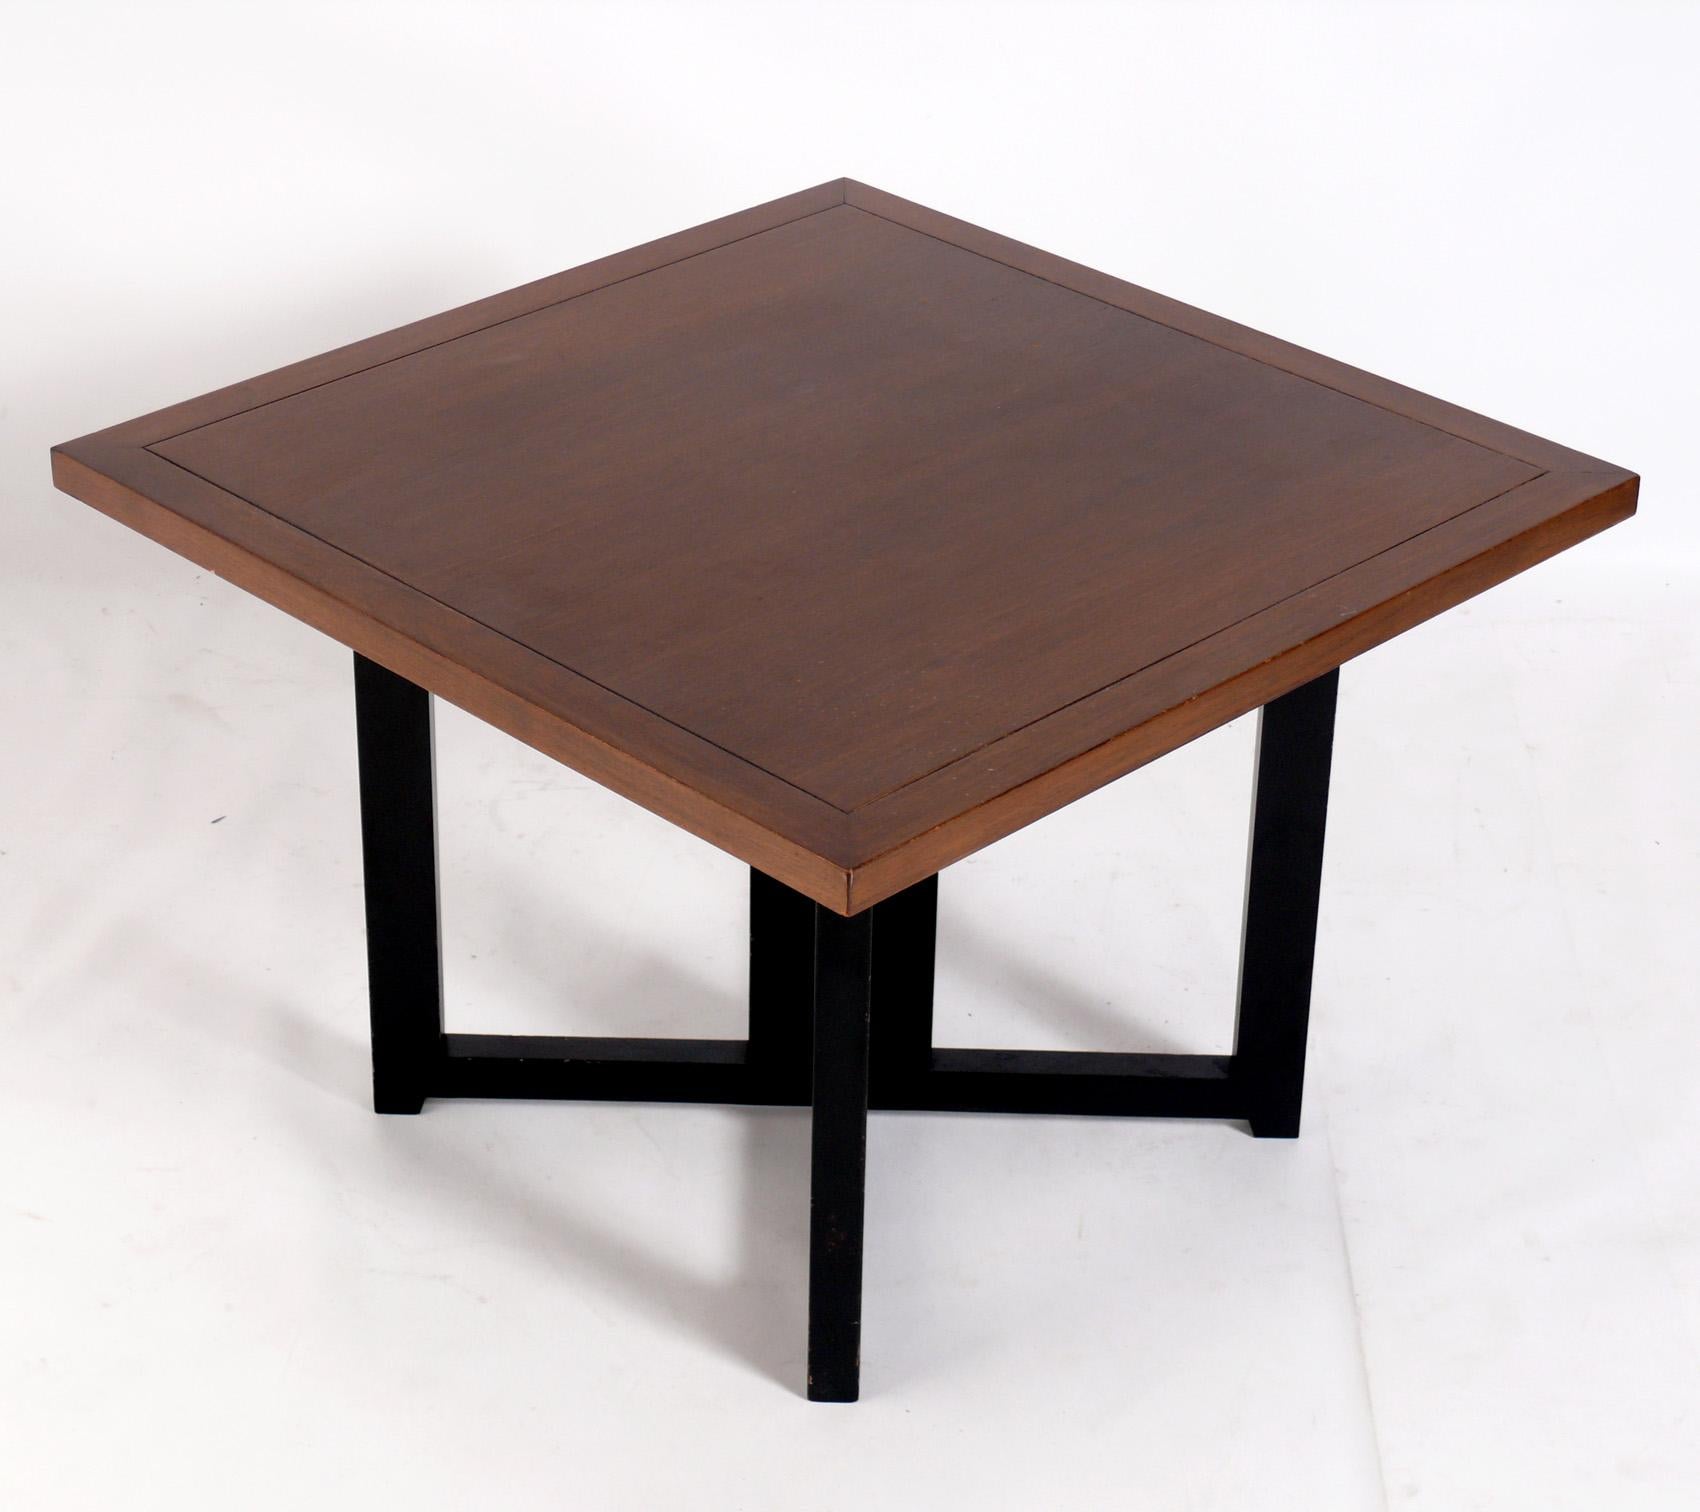 Clean Lined End Table, attributed to Milo Baughman for Directional, unsigned, American, circa 1960s. It is a versatile size and can be used as a side or end table, or as a night stand.